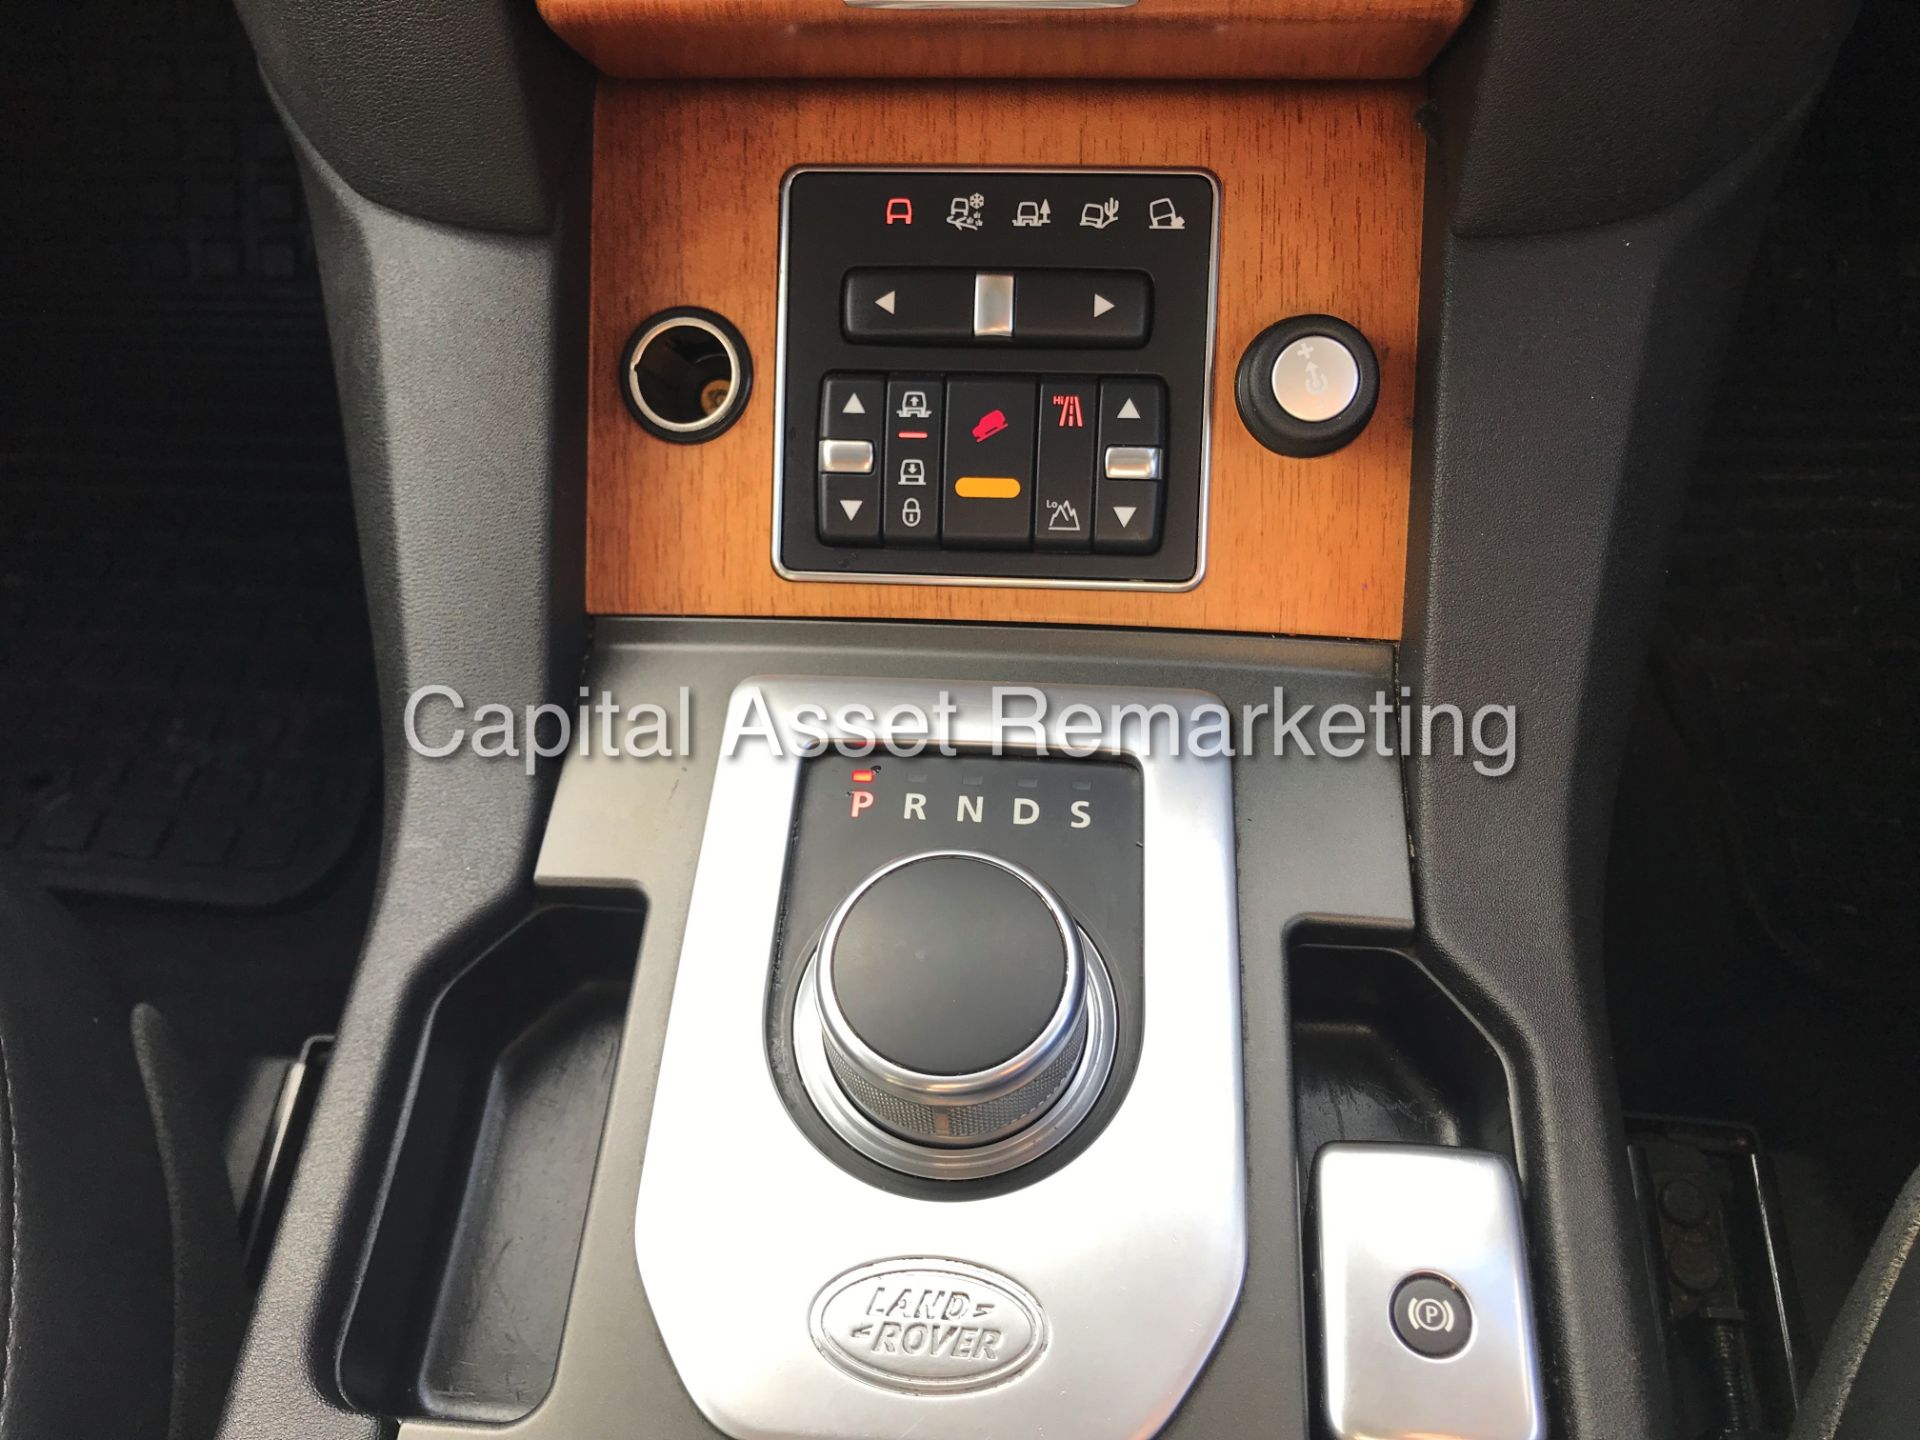 LAND ROVER DISCOVERY 4 "HSE" 3.0 SDV6 AUTOMATIC (13 REG) 7 SEATER - FULL LEATHER - SAT NAV *LOOK* - Image 17 of 25